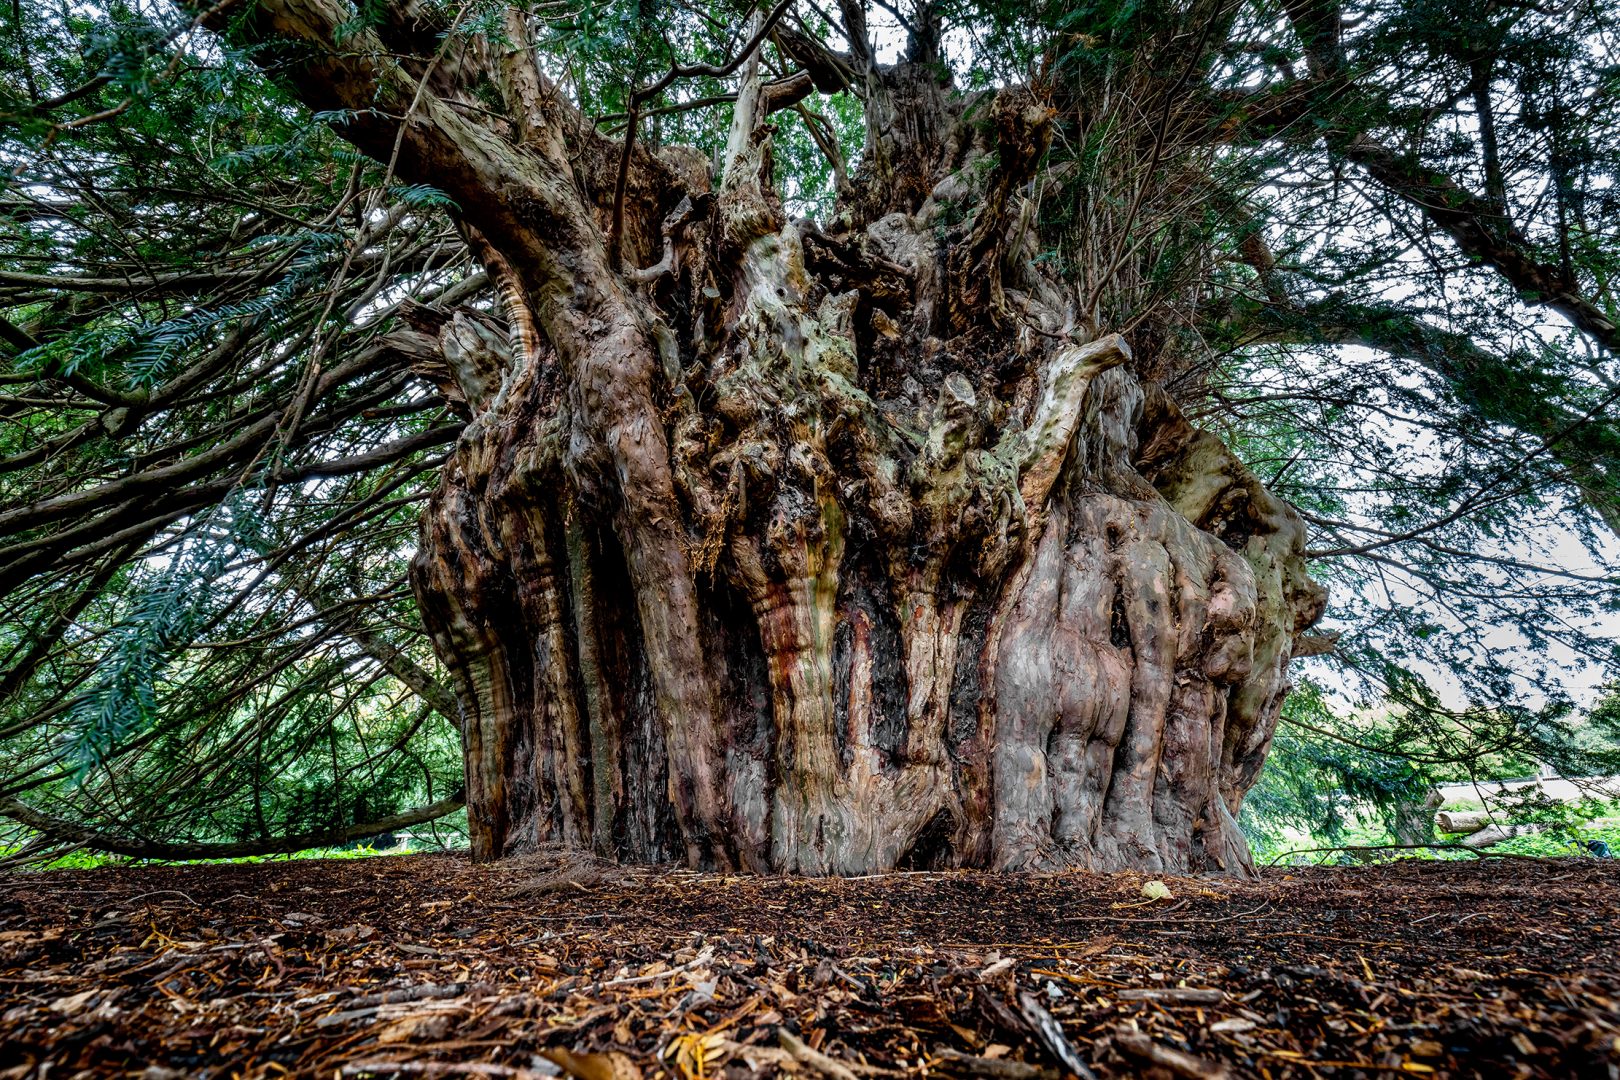 The Fortingall Yew's Tale